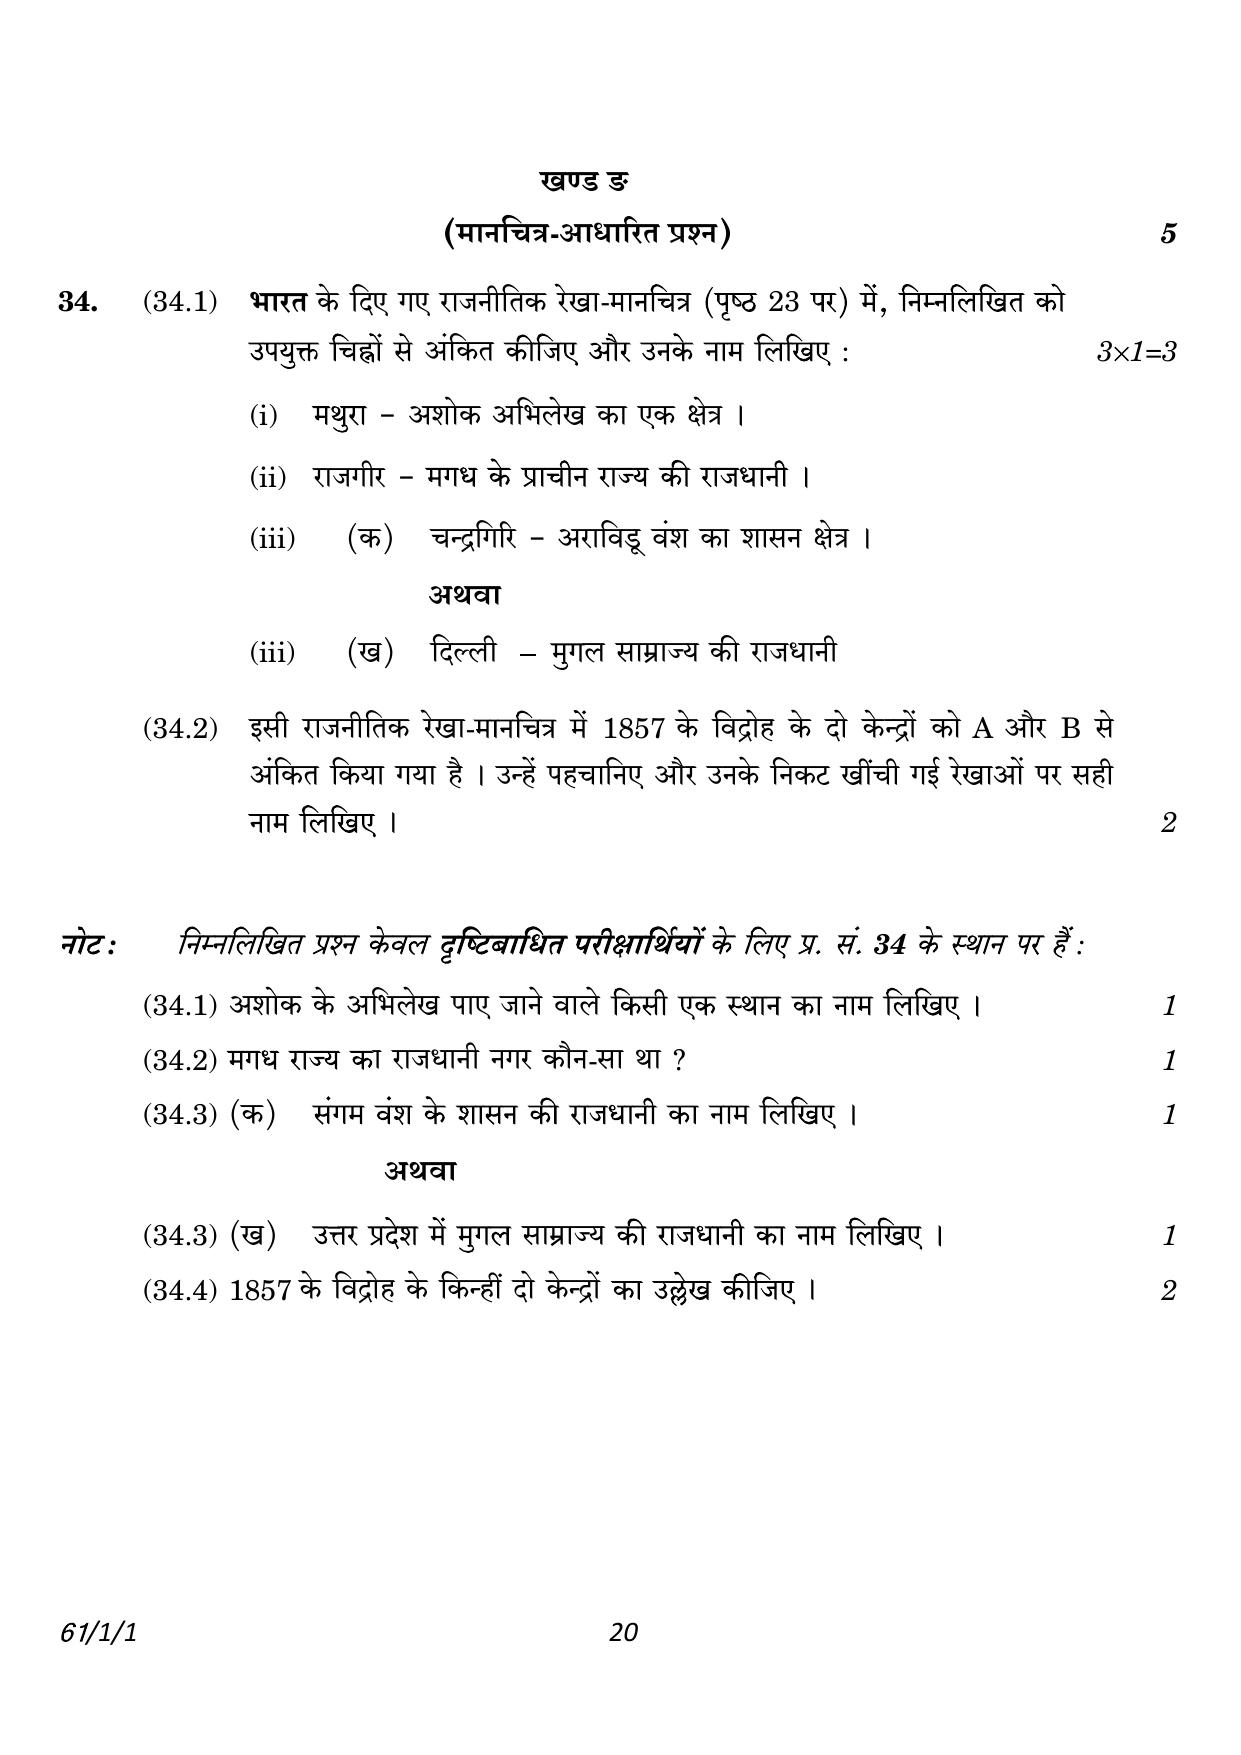 CBSE Class 12 61-1-1 History 2023 Question Paper - Page 20